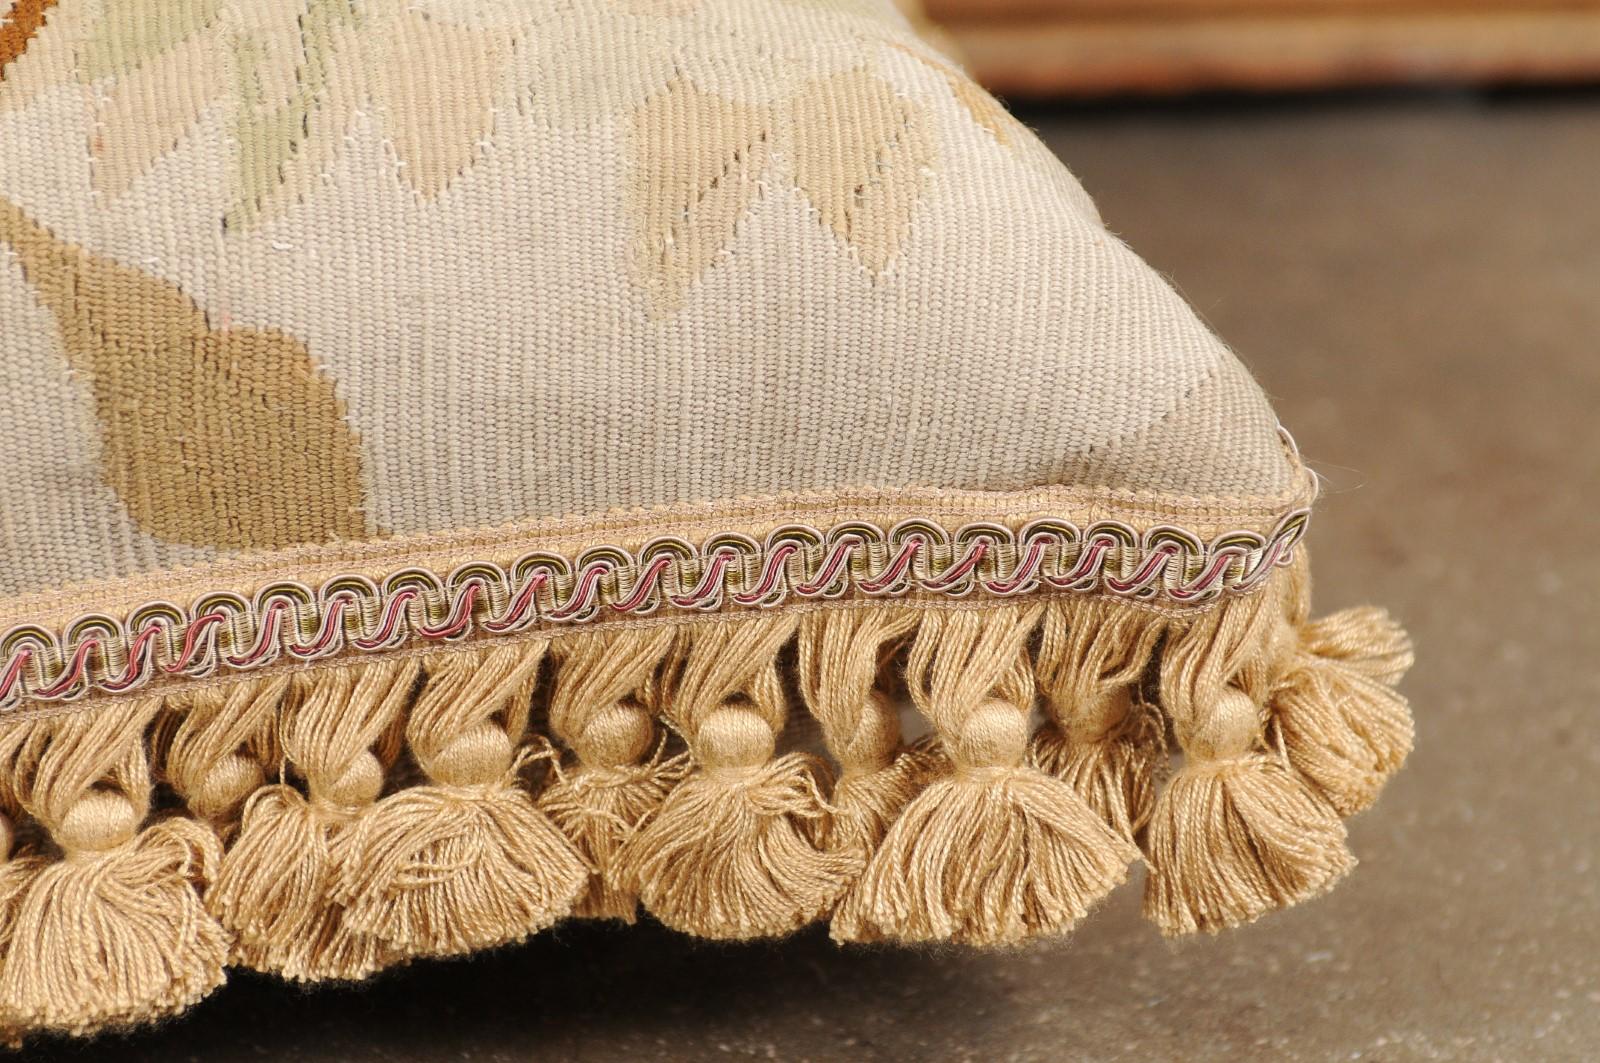 19th Century French Aubusson Woven Tapestry Pillow with Floral Décor and Tassels For Sale 9